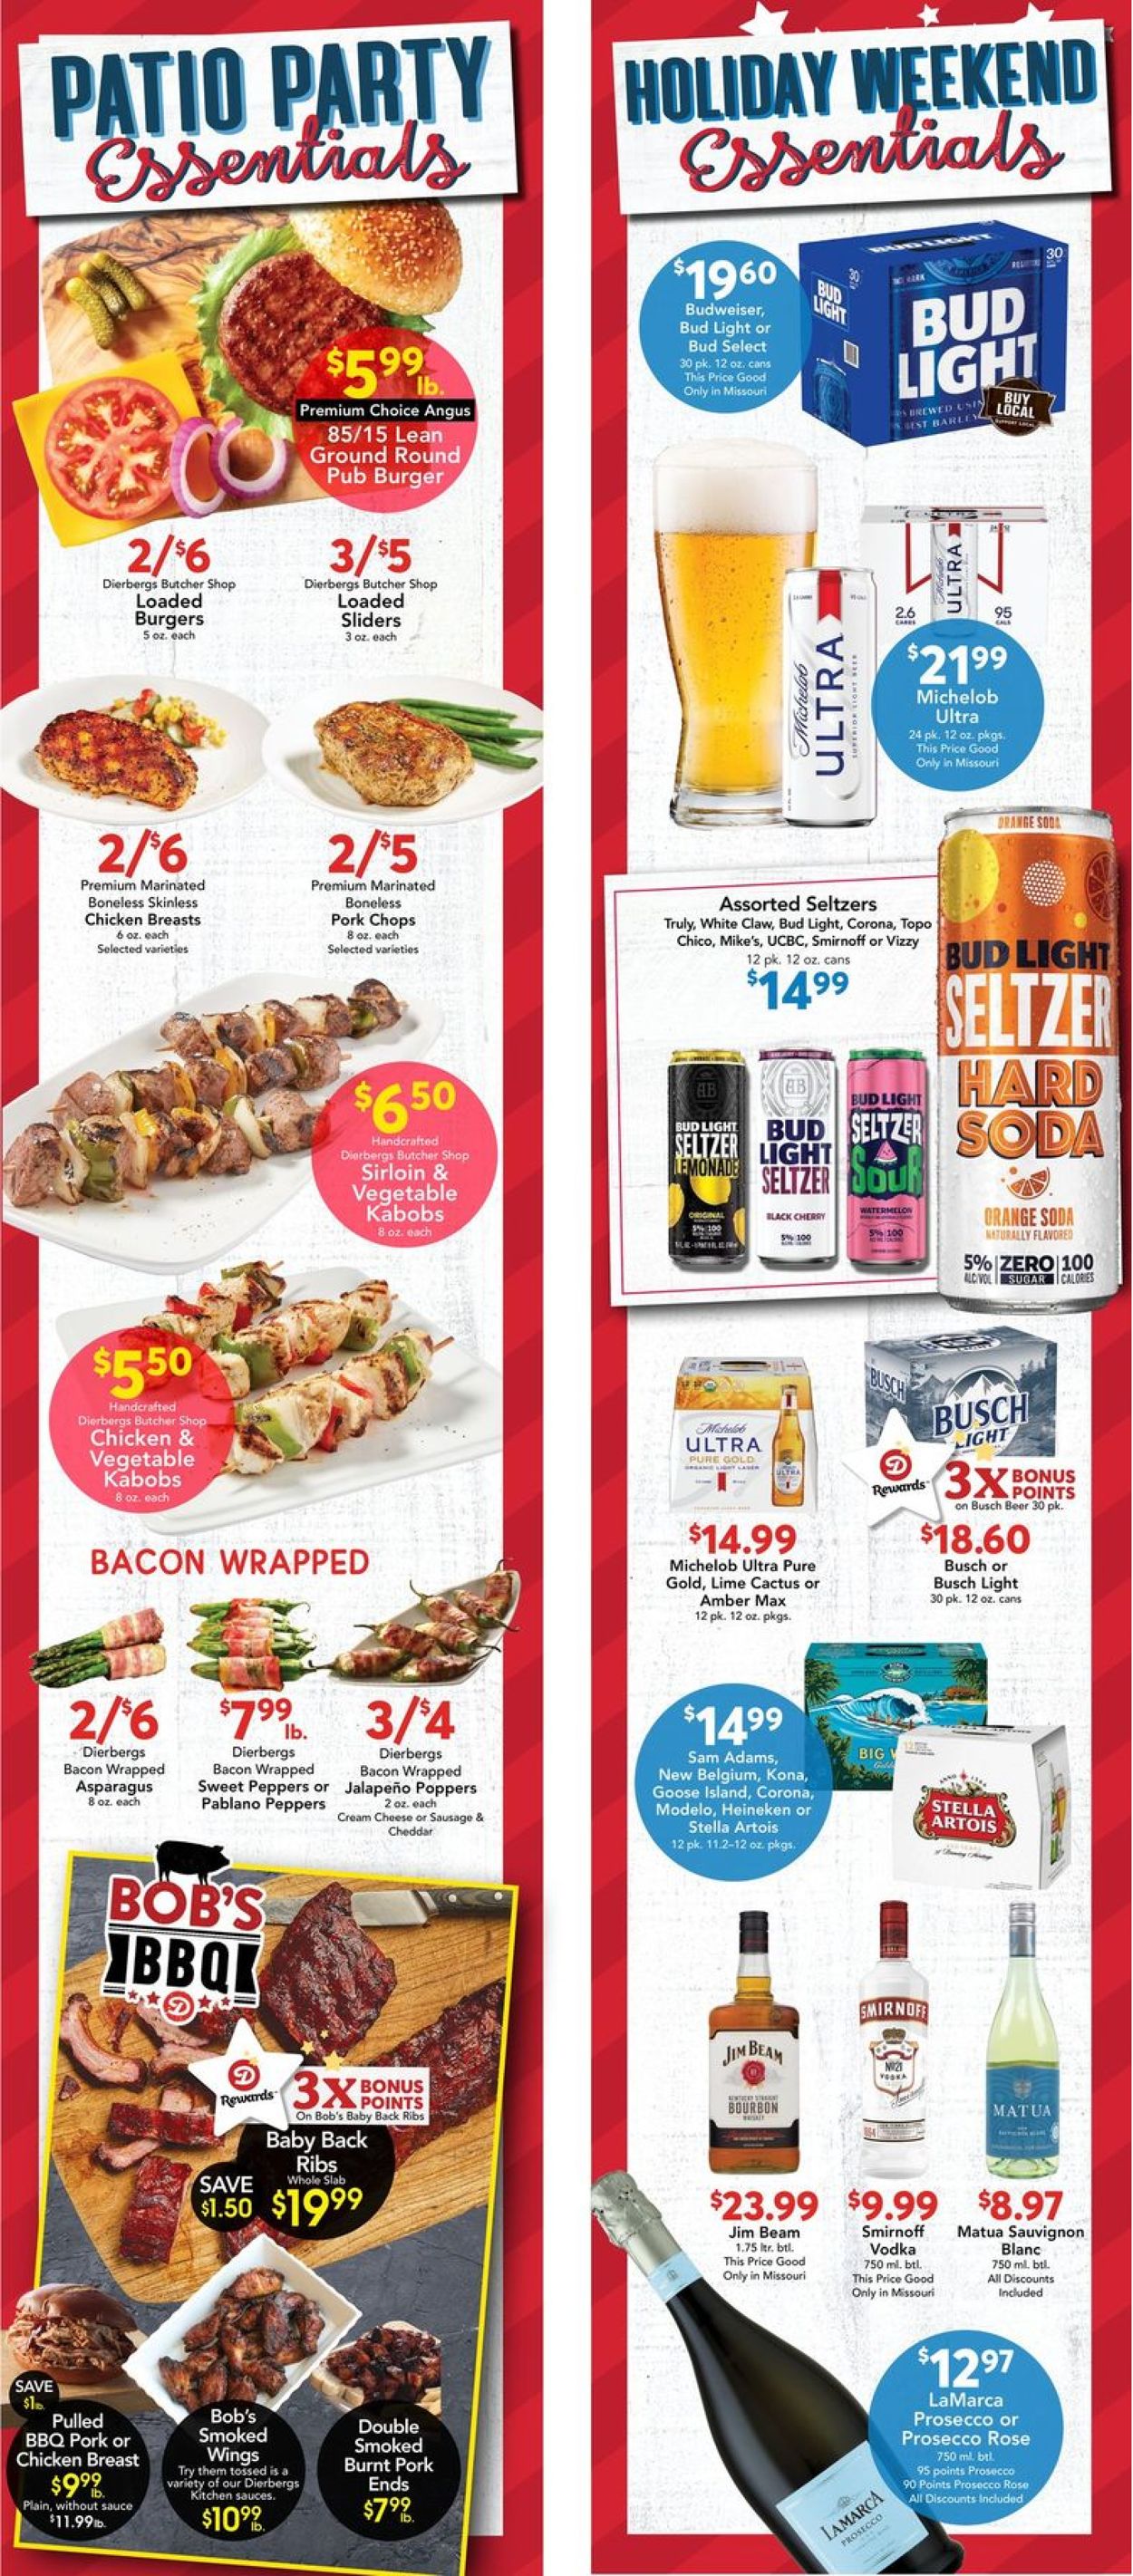 Catalogue Dierbergs from 05/24/2022